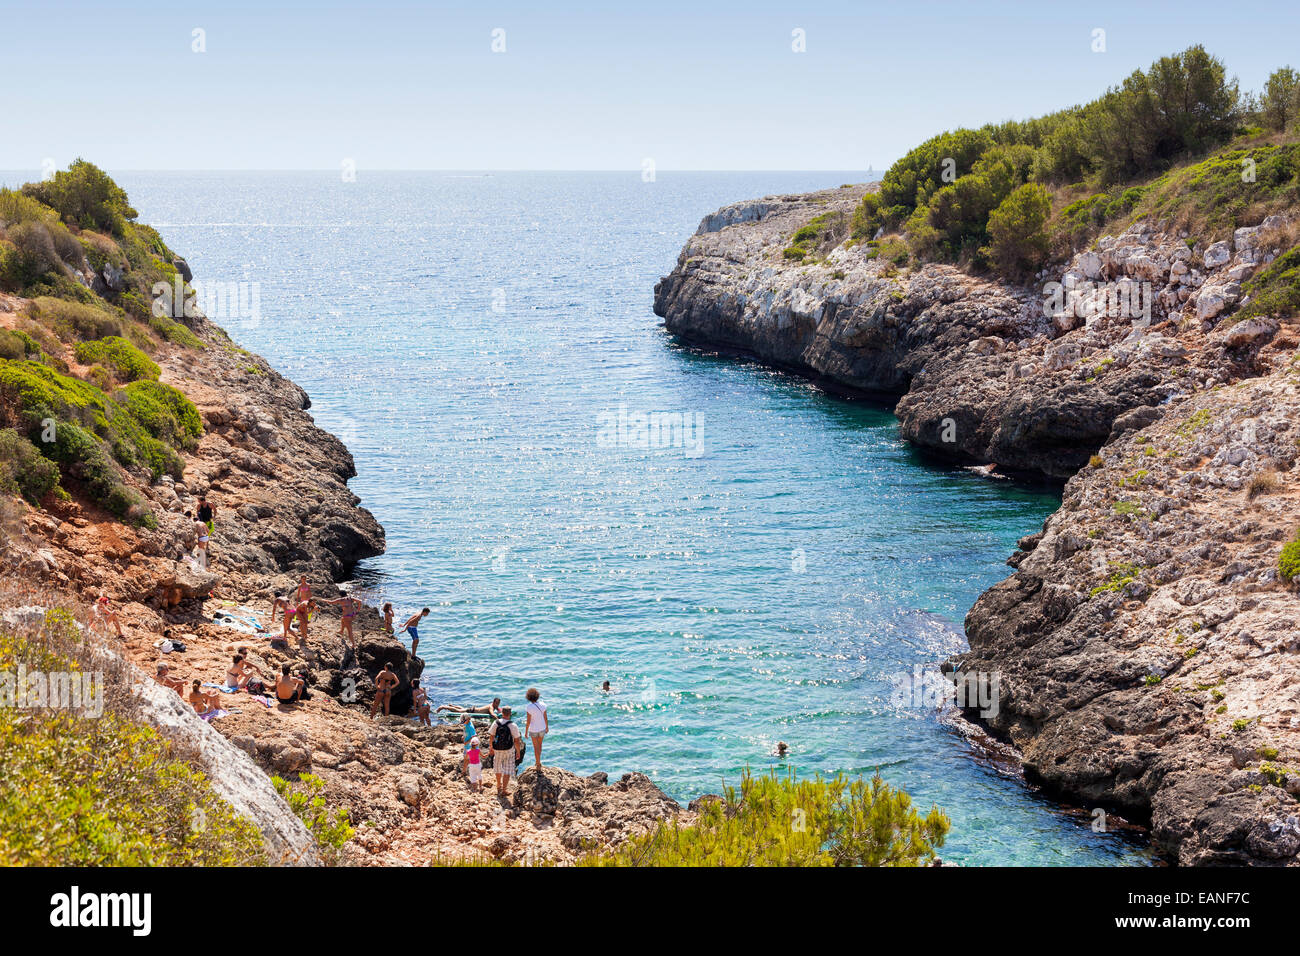 Swimmers enjoying at a cove in Majorca during summer Stock Photo